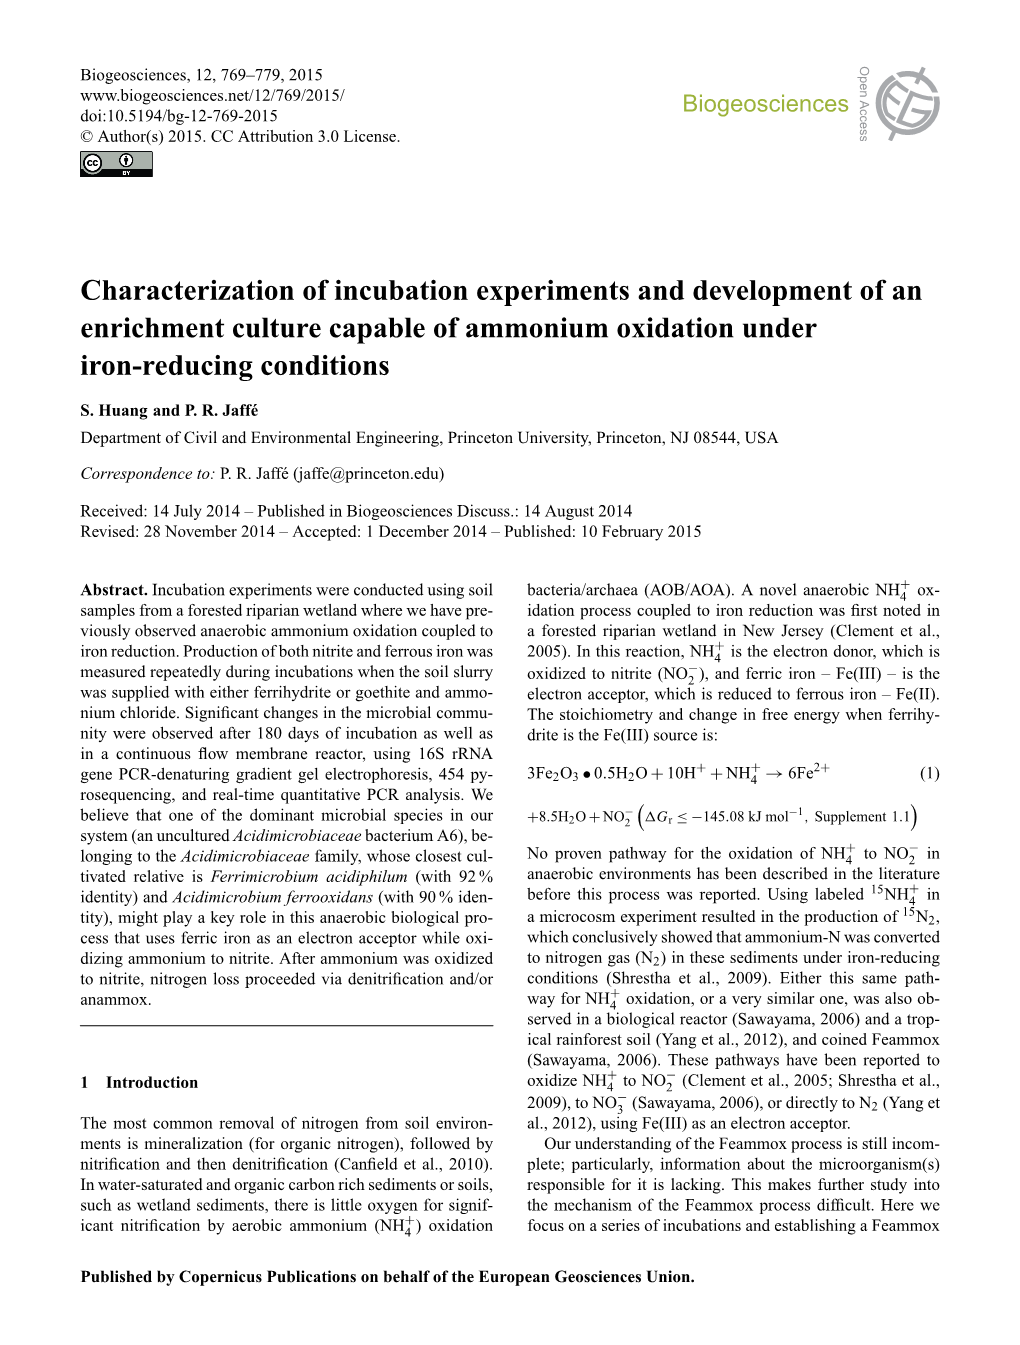 Characterization of Incubation Experiments and Development of an Enrichment Culture Capable of Ammonium Oxidation Under Iron-Reducing Conditions